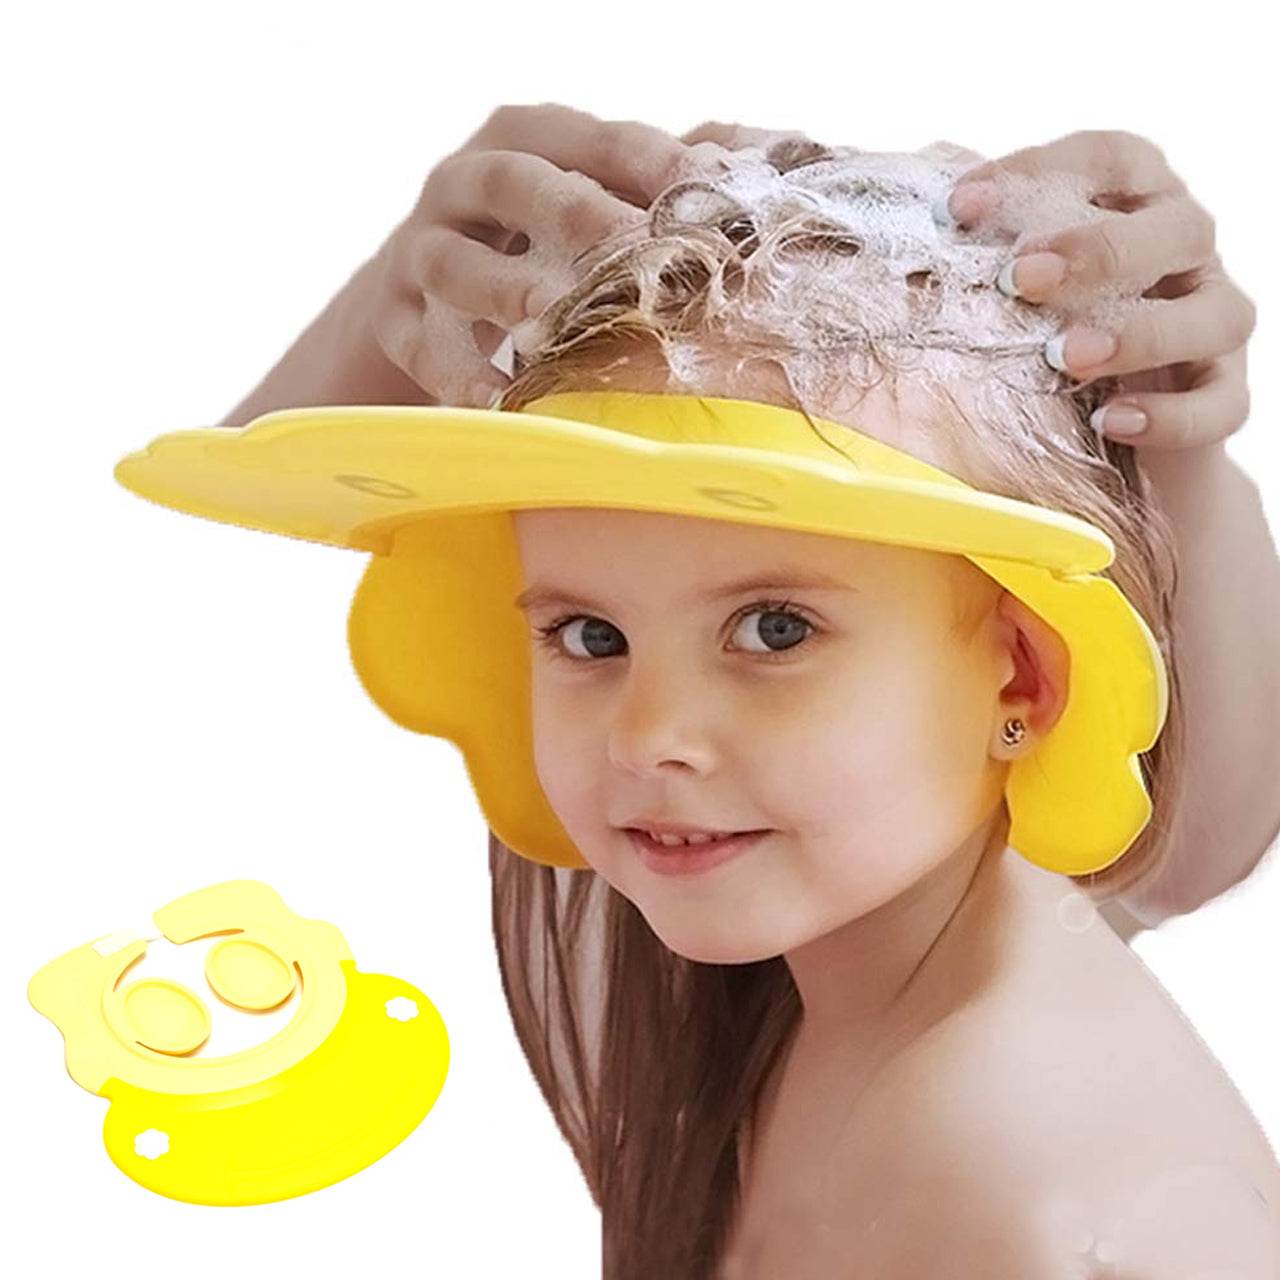 6641 Silicone Baby Shower Cap Bathing Baby Wash Hair Eye Ear Protector Hat for New Born Infants babies Baby Bath Cap Shower Protection For Eyes And Ear. DeoDap